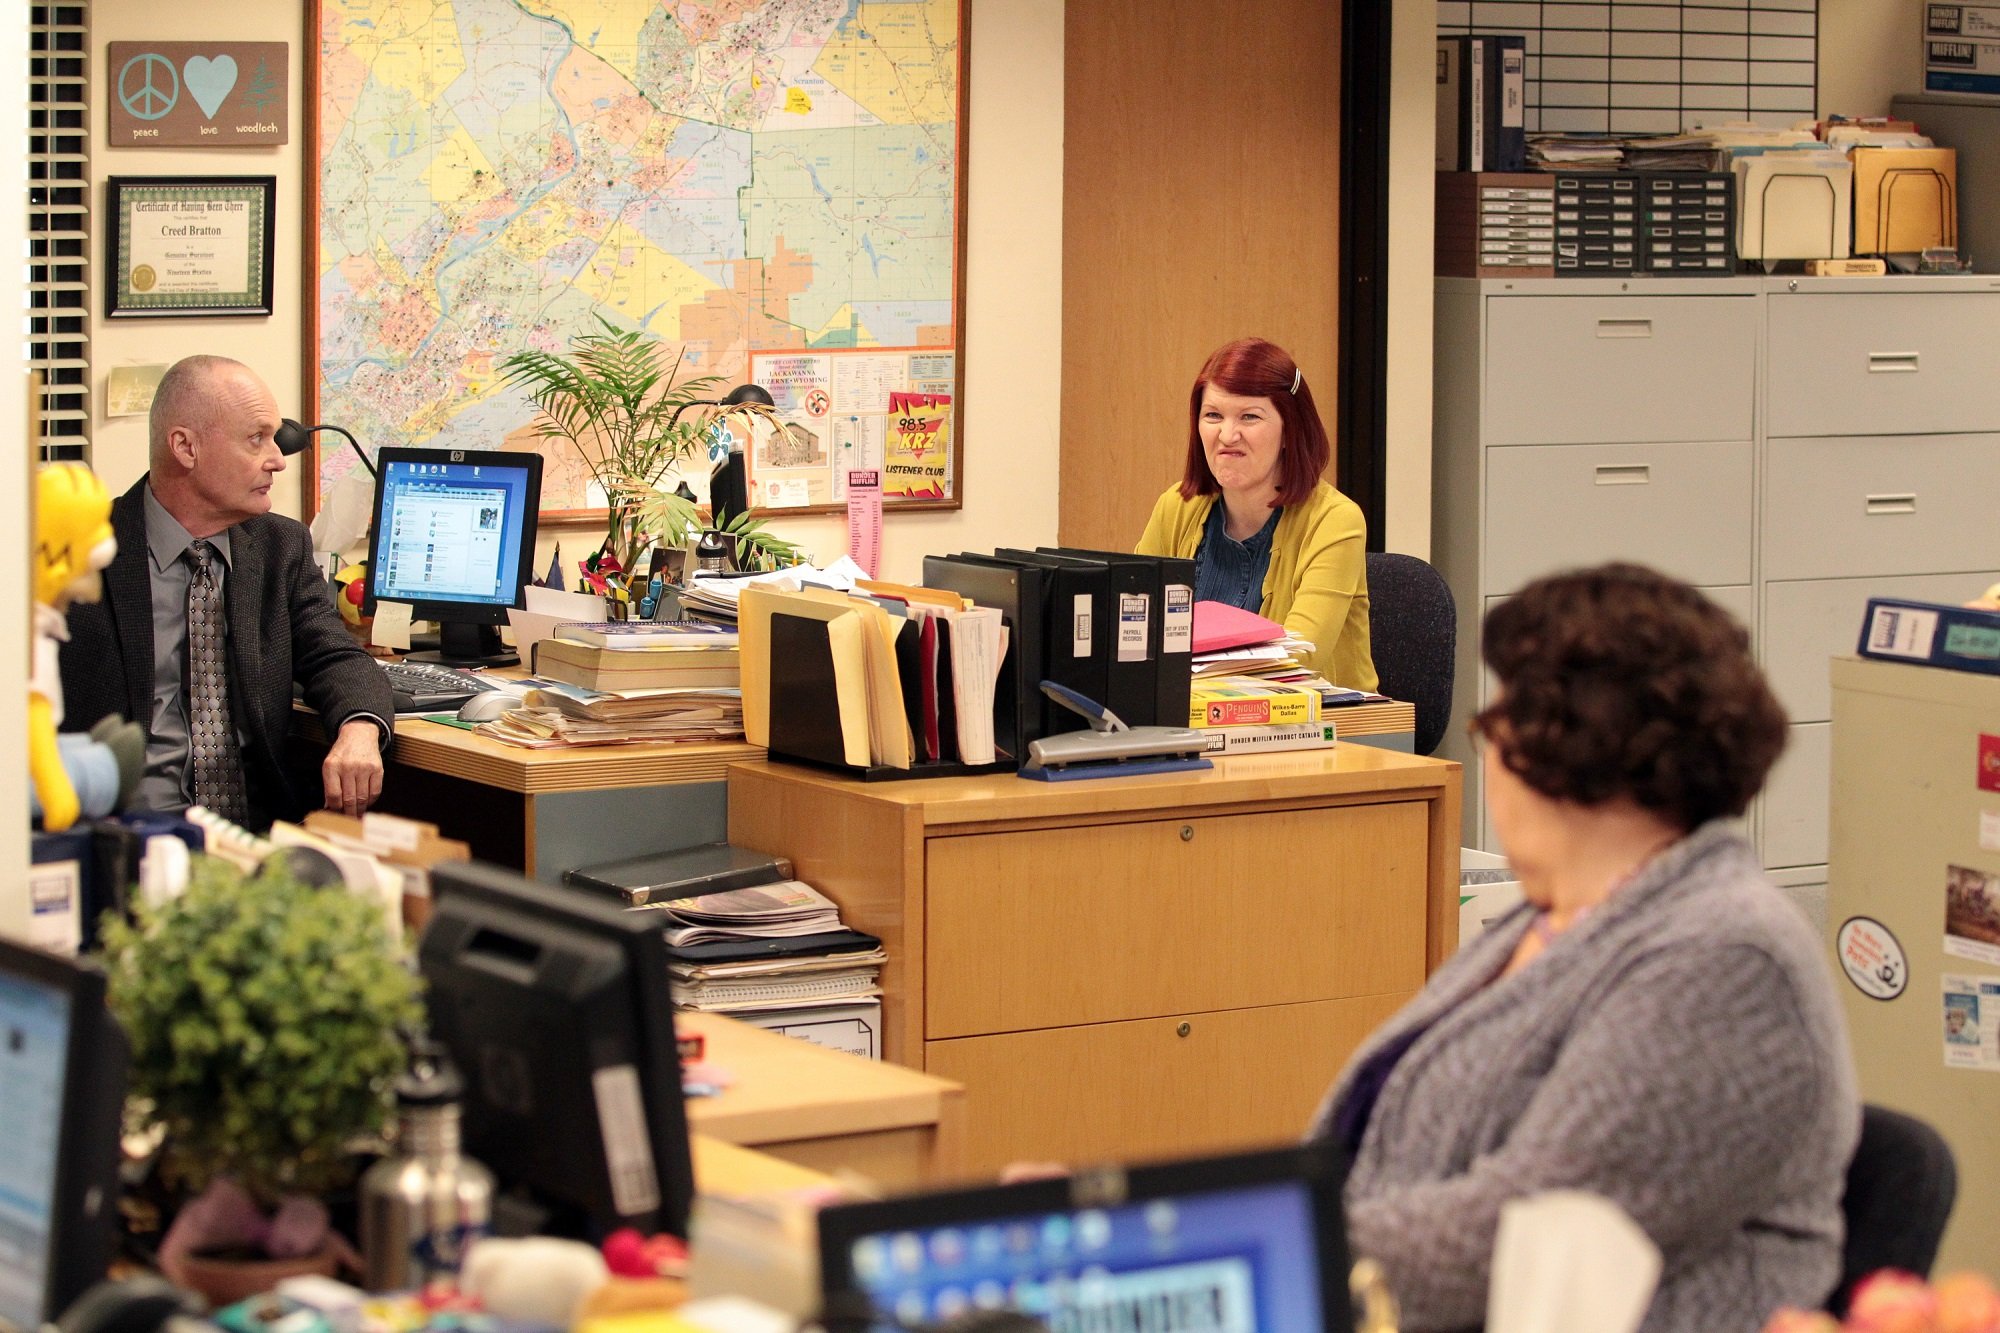 Kate Flannery: The Office